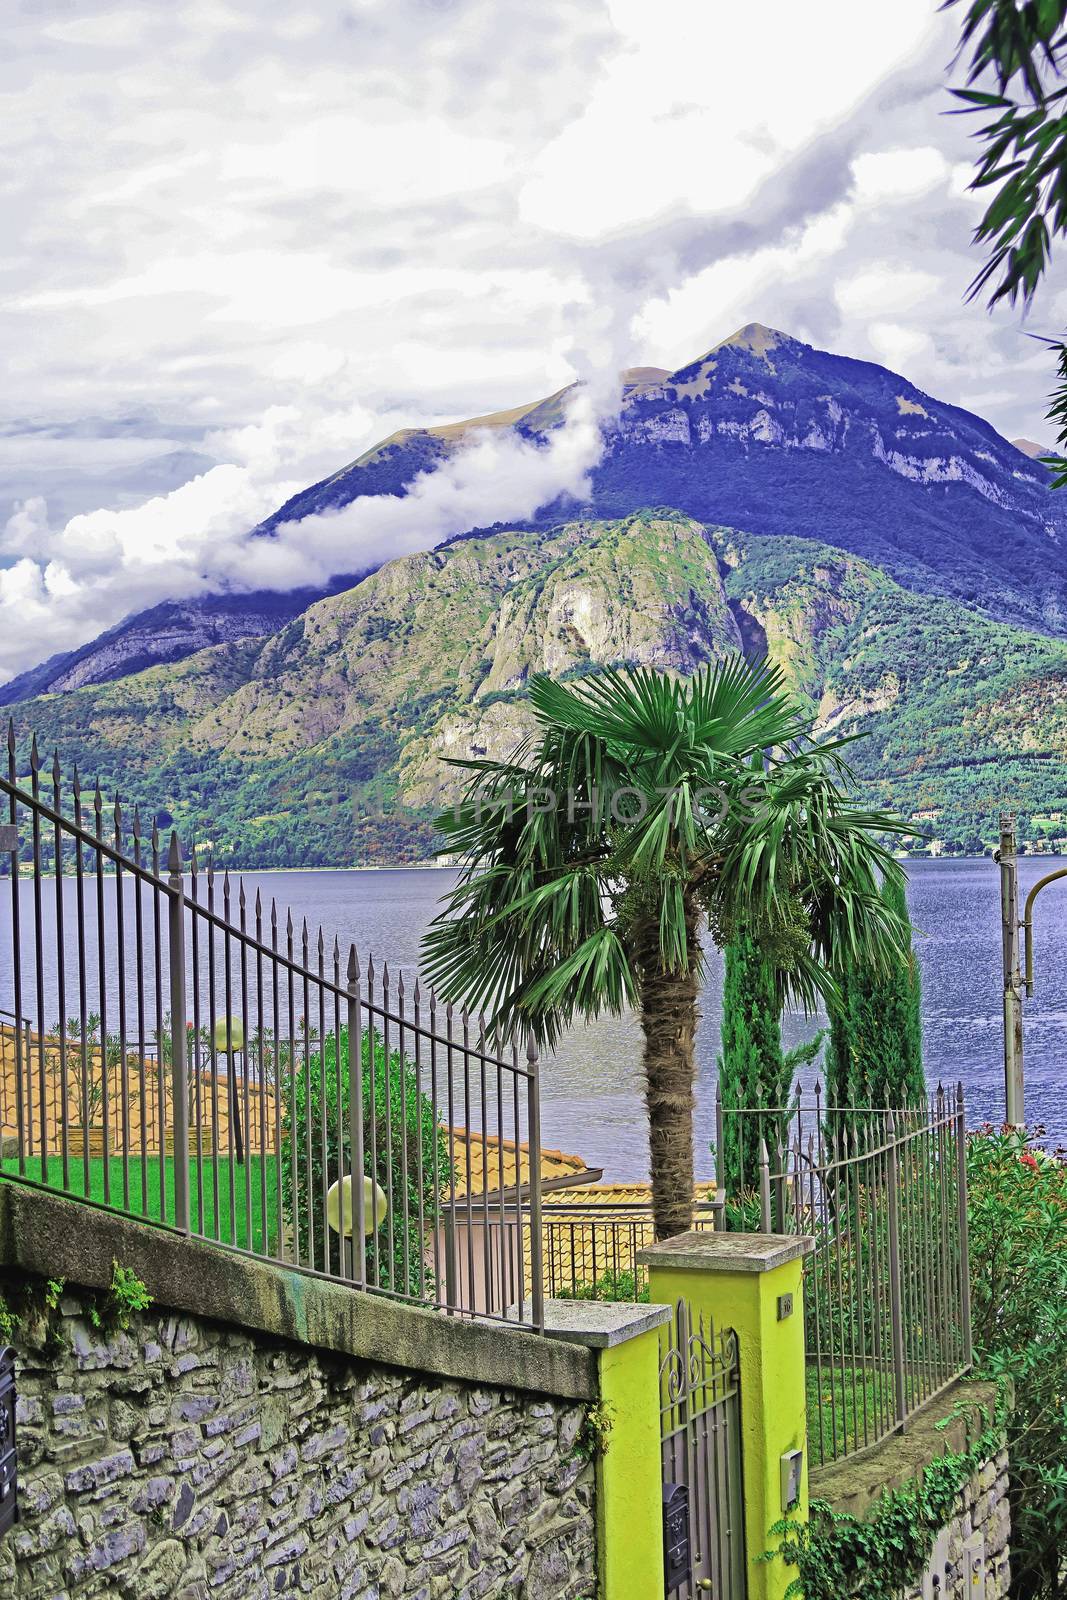 View of Lake Como from a steep street in Varenna, Italy